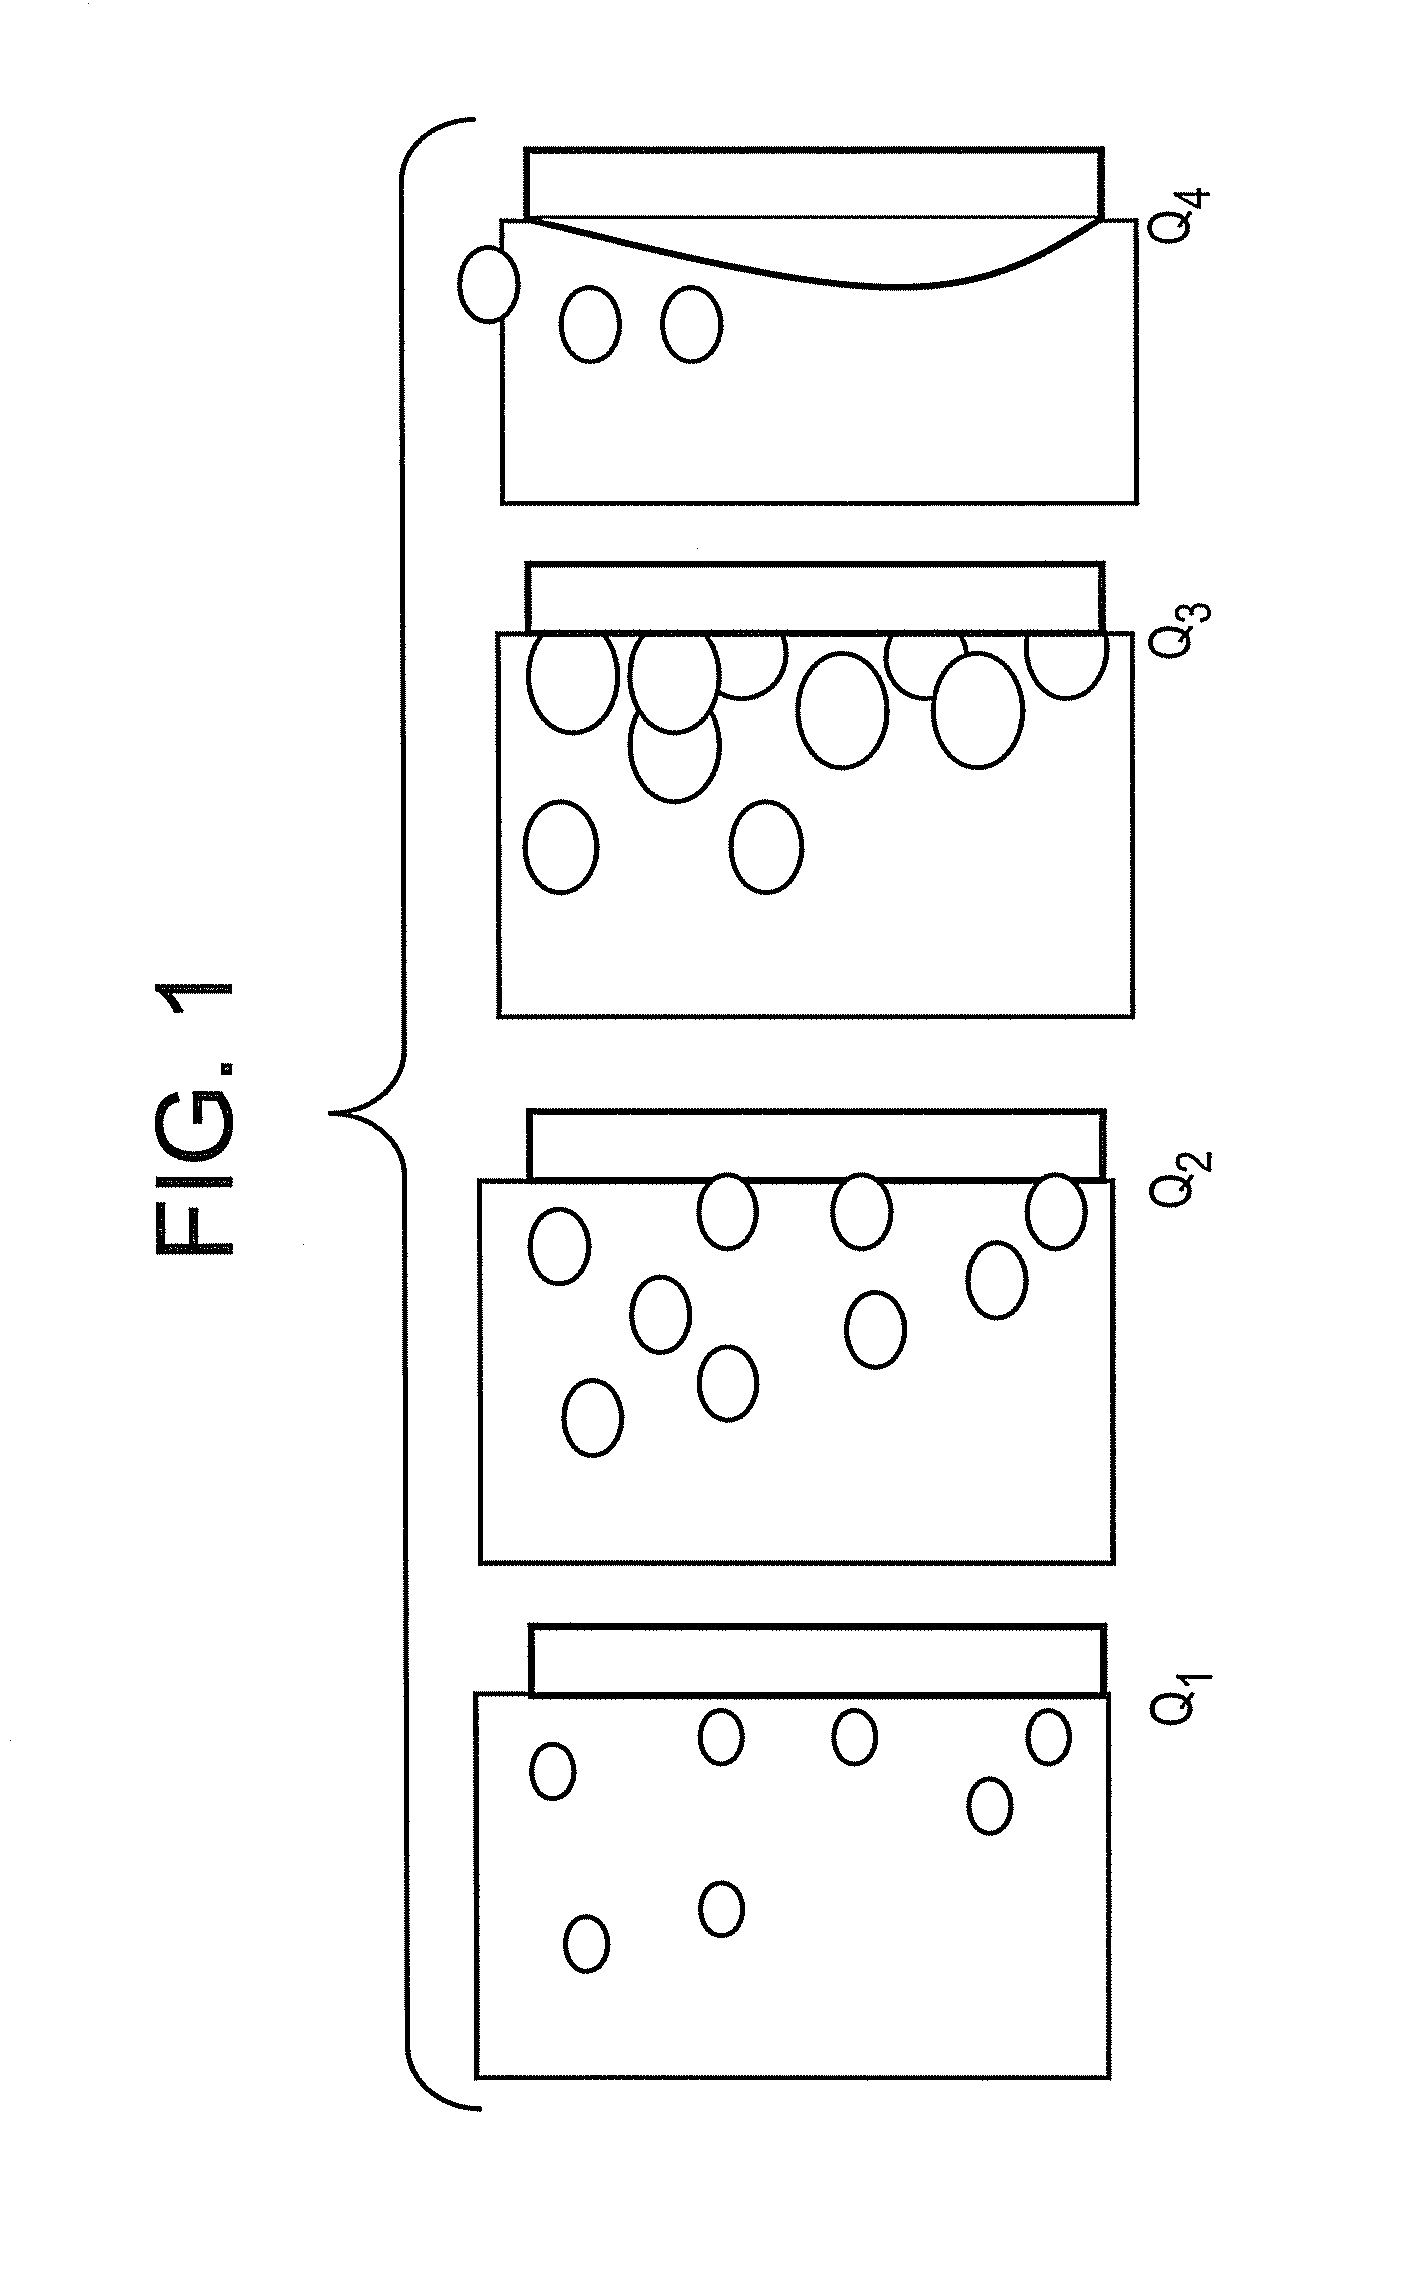 Surface having a nanoporous coating, methods of manufacture thereof and articles comprising the same